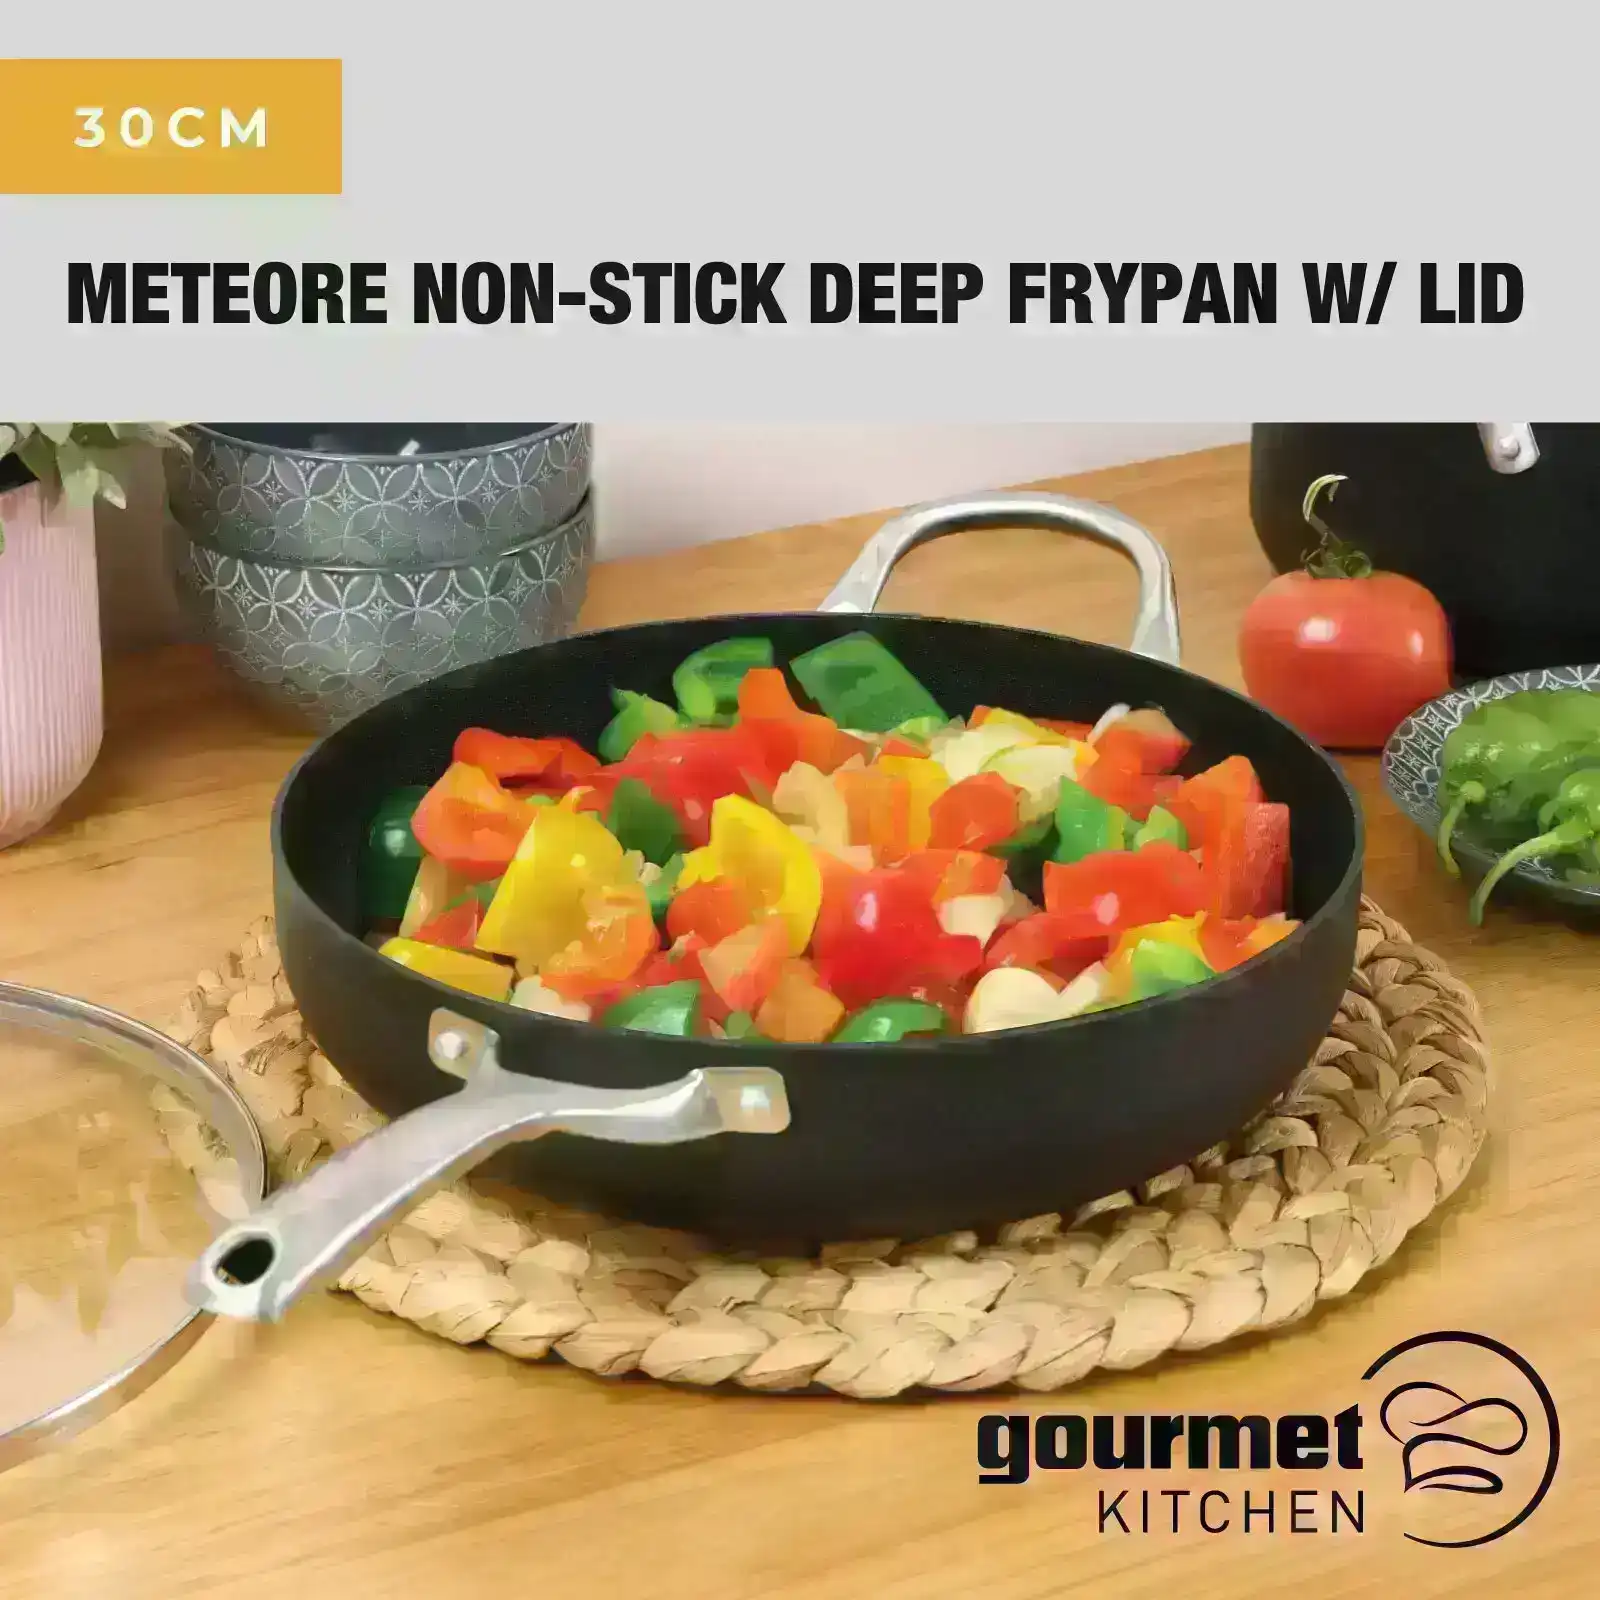 Gourmet Kitchen Meteore Non-Stick Deep Frypan with Flat Lid and Helper 30cm